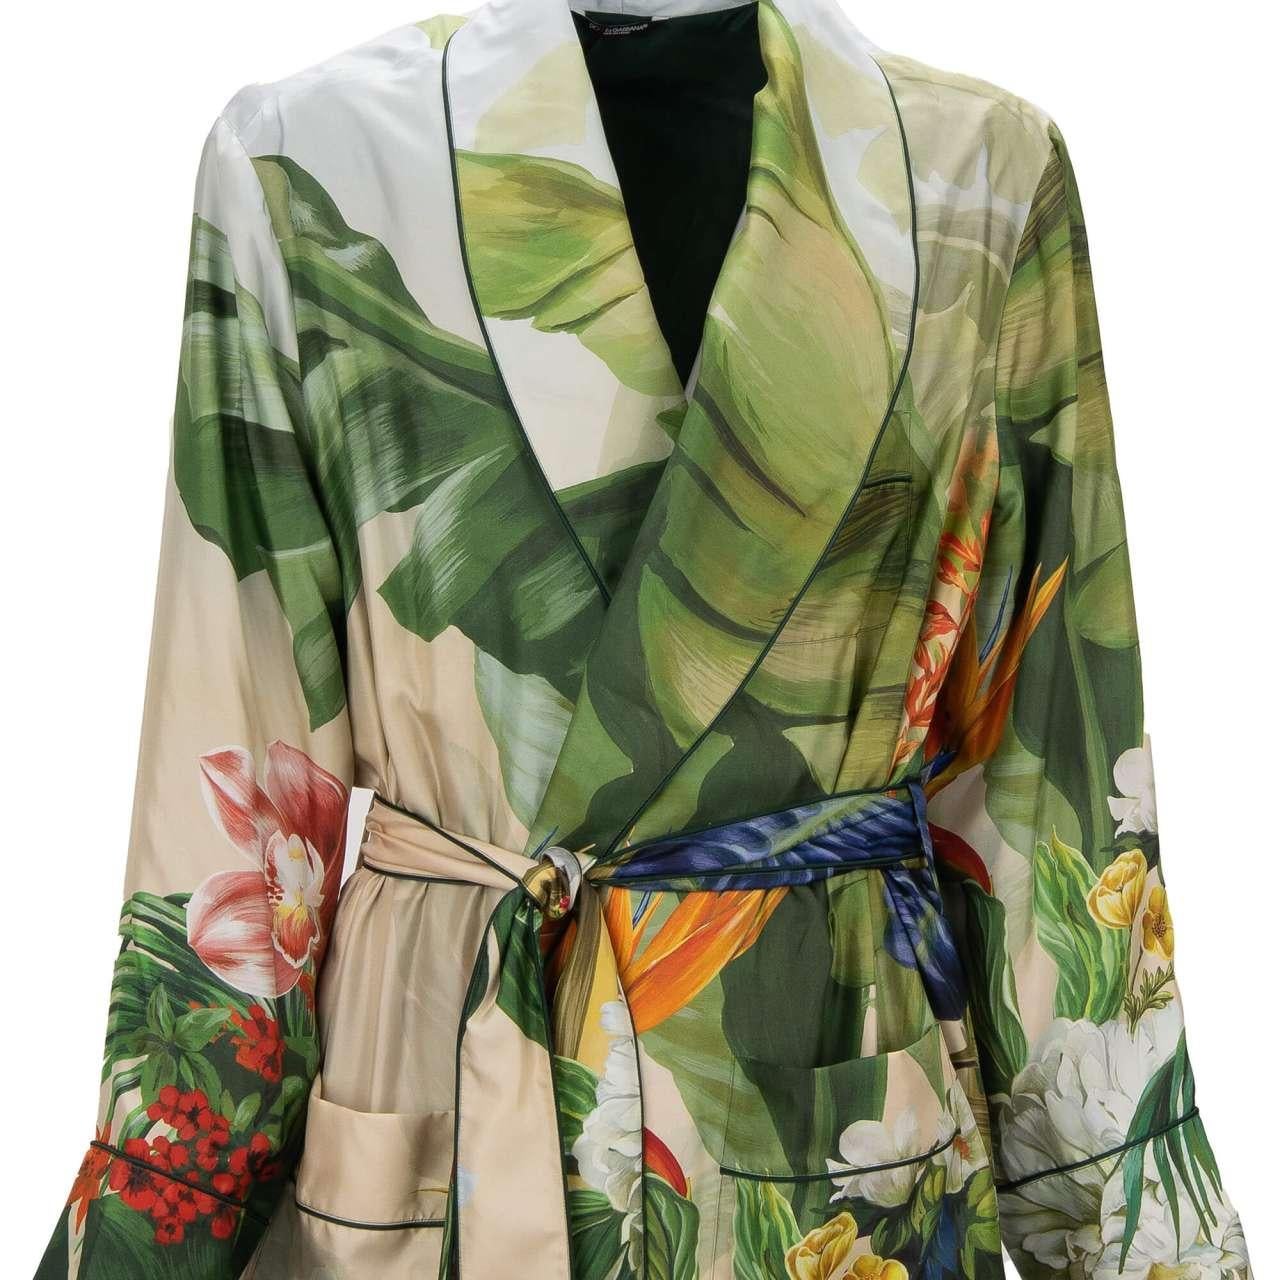 - Silk Coat / Robe with tropical print and large shawl collar by DOLCE & GABBANA - RUNWAY: Dolce&Gabbana Fashion Show - New with tag - Former RRP: EUR 2,950 - MADE IN ITALY - Classic Fit - Model: G0936T-FI1RI-HH1ML - Material: 100% Silk - Lining: